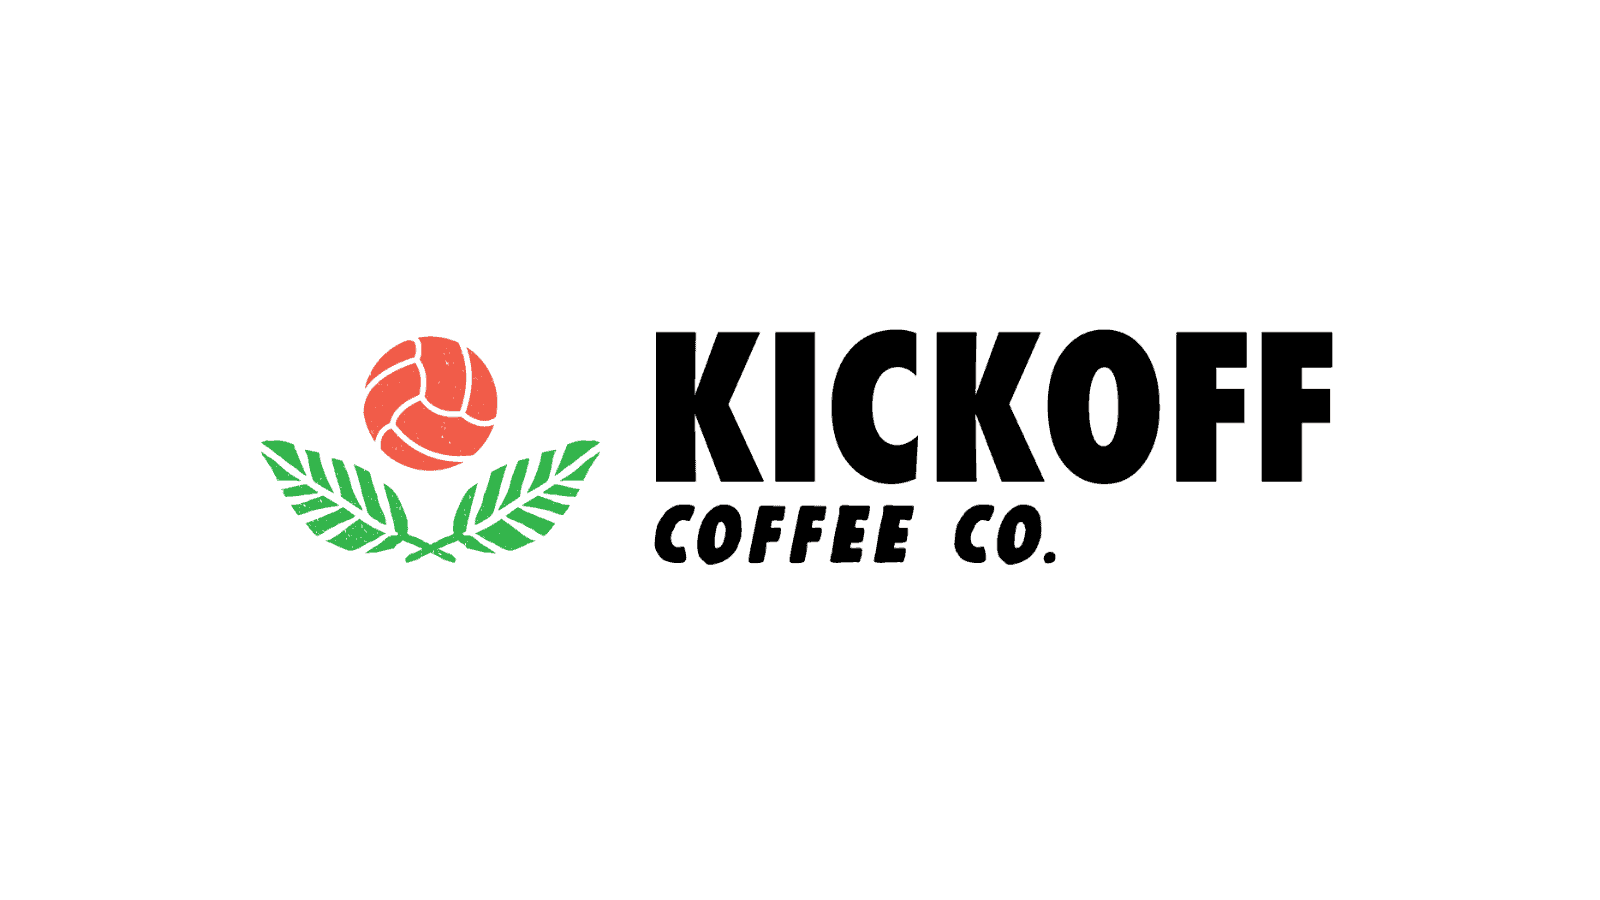 Kickoff Coffee Co. logo – an orange soccer ball above two green leaves next to the words "Kickoff" and "Coffee" and abbreviation of "company"